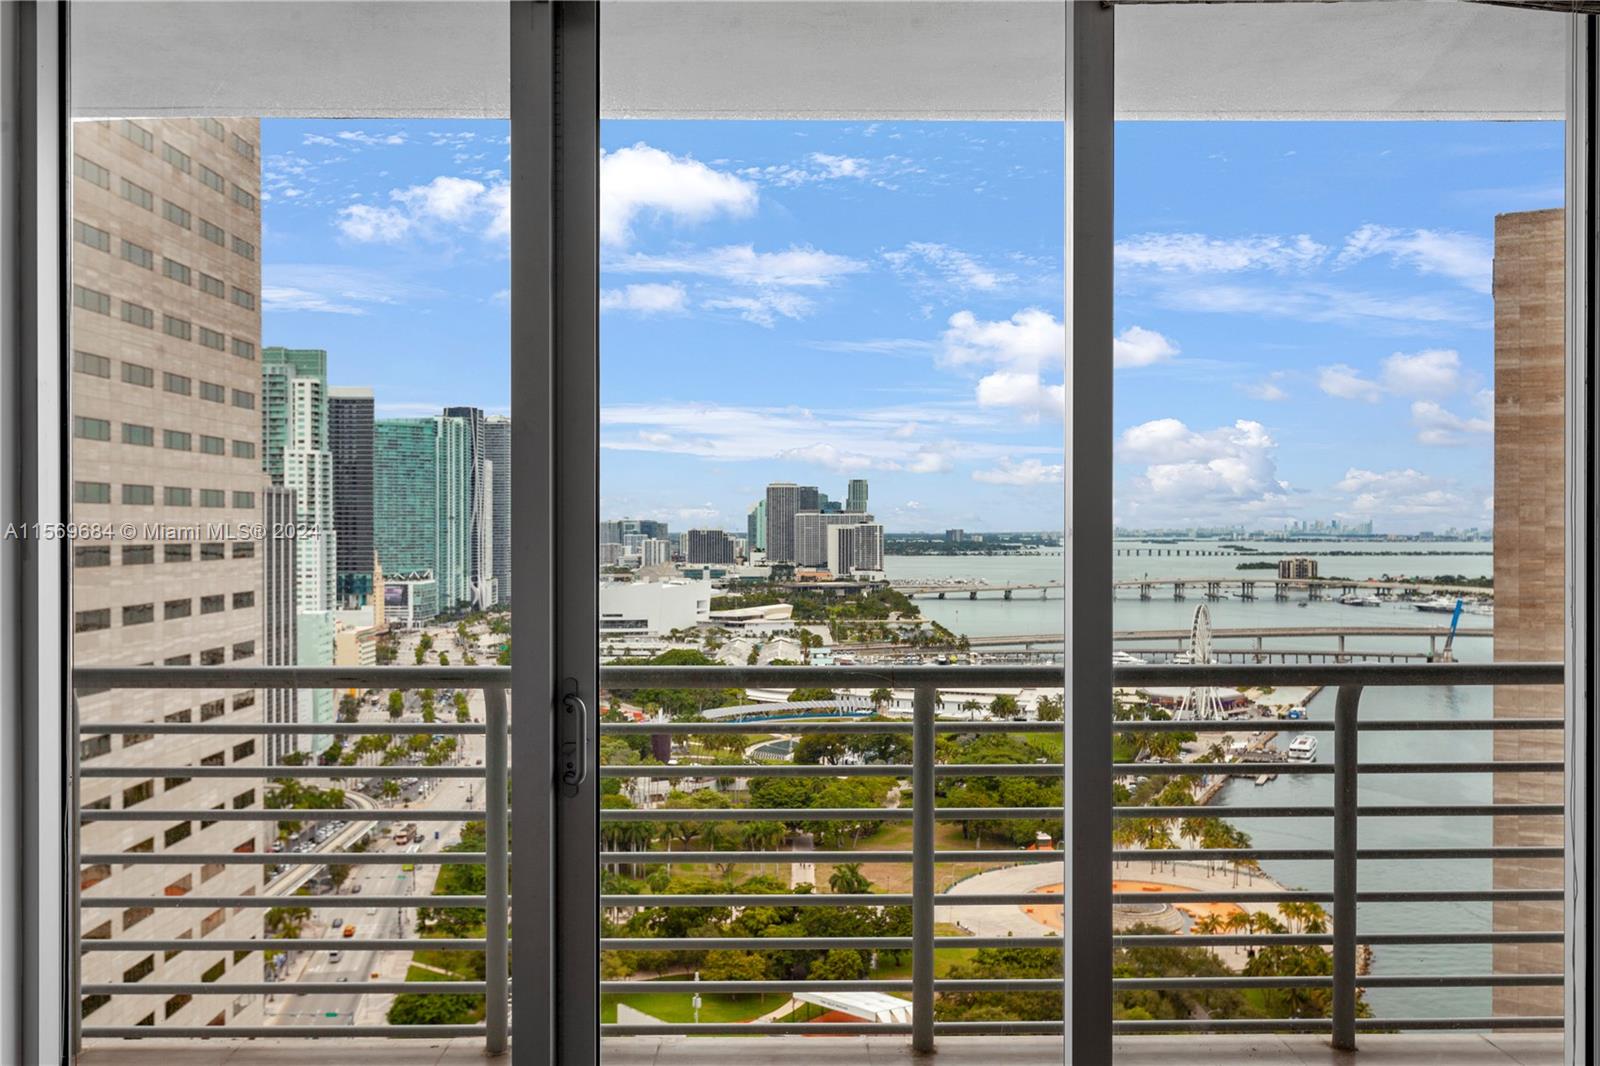 Enjoy waterfront living in this spectacular 32nd-floor apartment, boasting stunning views of the bay, Bayside Front Park, and the dazzling city skyline of Miami.
Best 2 bed / 2 full bath line in the building, boasting coveted “split plan” layout w/ beautiful, Brazilian teak wood floors, custom designed corner booth for dining / entertaining.
This building offers luxurious amenities including two pools, jacuzzi, party room, 24 hr valet parking, 24/7 concierge, convenient store. 
Situated in Miami’s most exclusive area, Brickell, Whole Foods & Metromover station just 1 block away, convenient access to the airport and just 15 from the beach. (1) assigned garage parking space - Additional space available for monthly purchase. Don’t miss the opportunity to live in paradise!